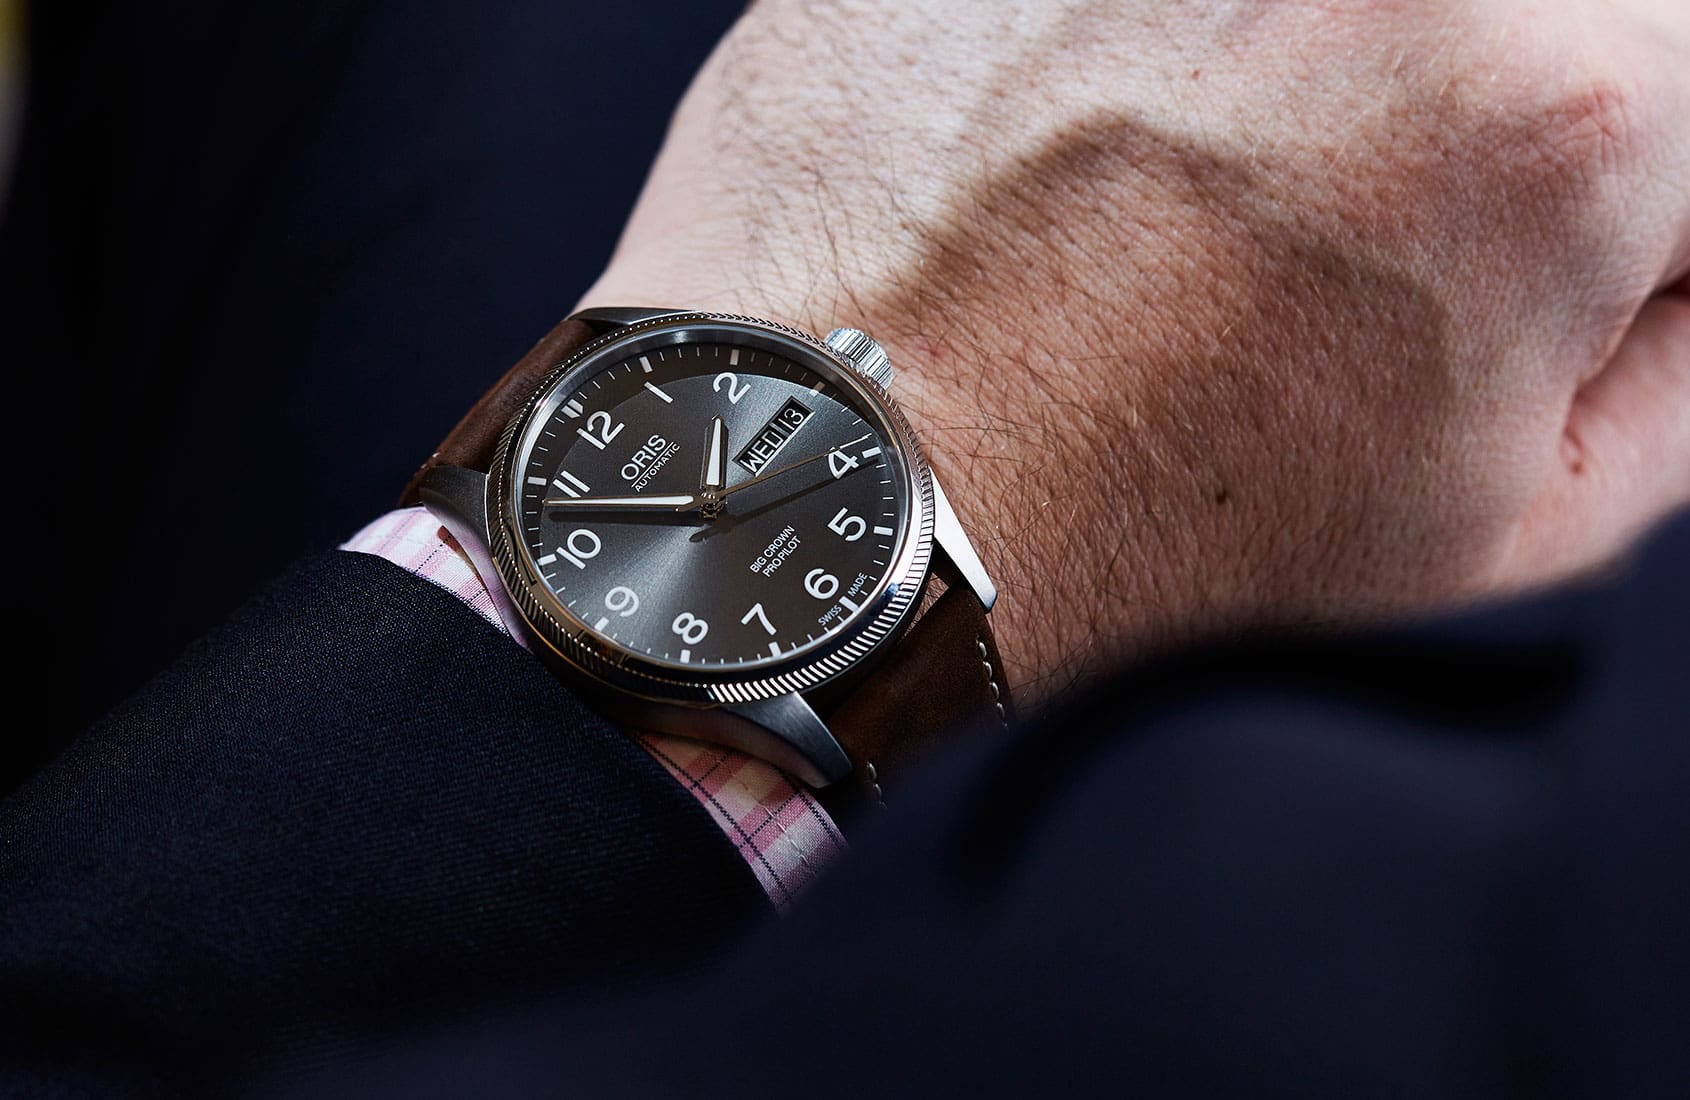 HANDS-ON: Reach for the skies with the Oris Pro-Pilot Big Crown Day Date